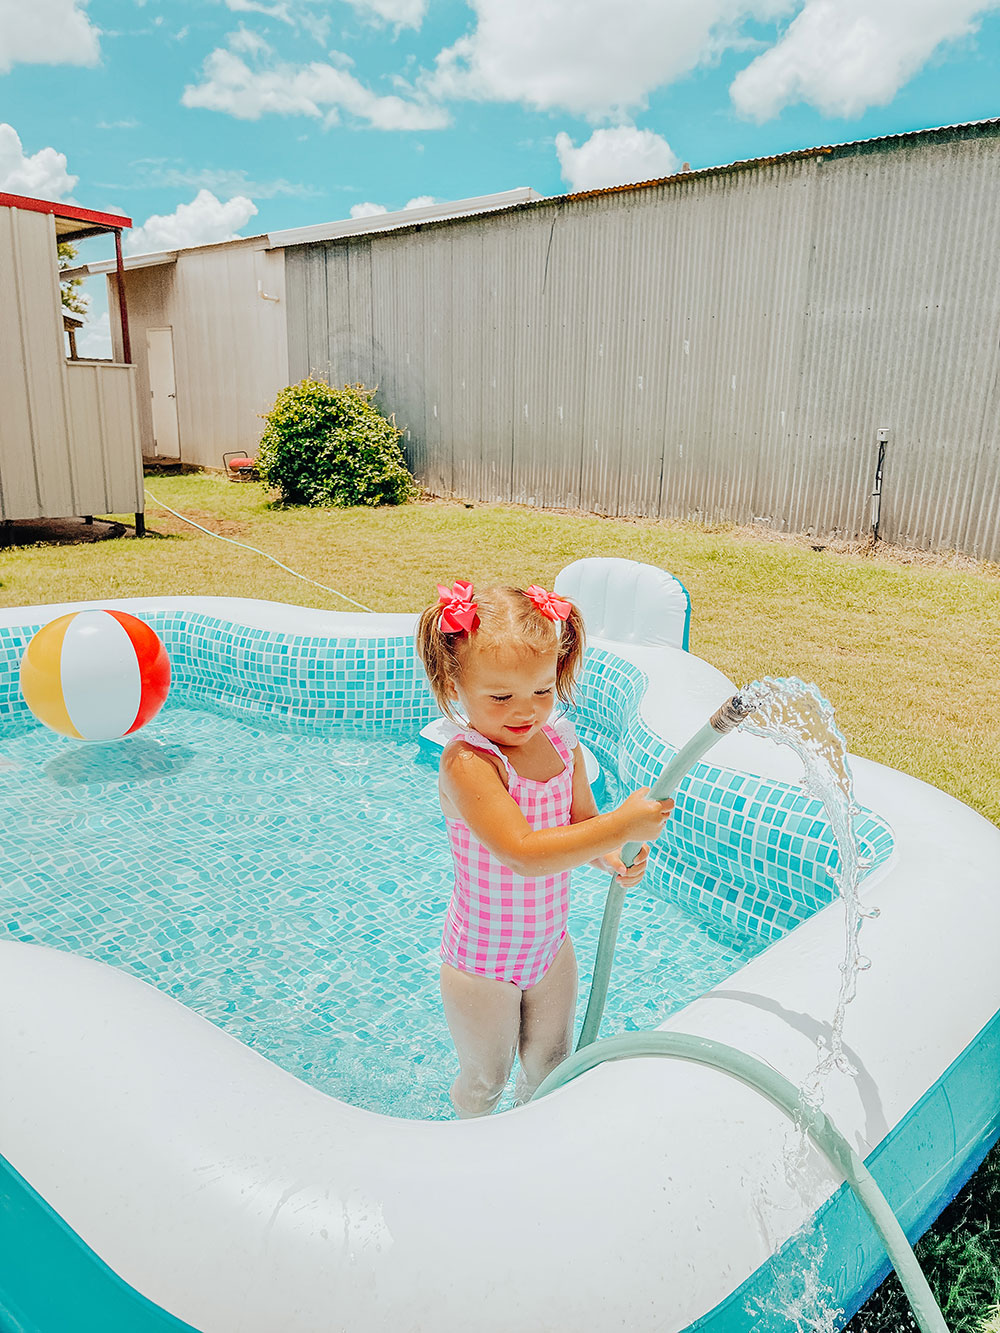 outdoor activity ideas for kids - inflatable pool